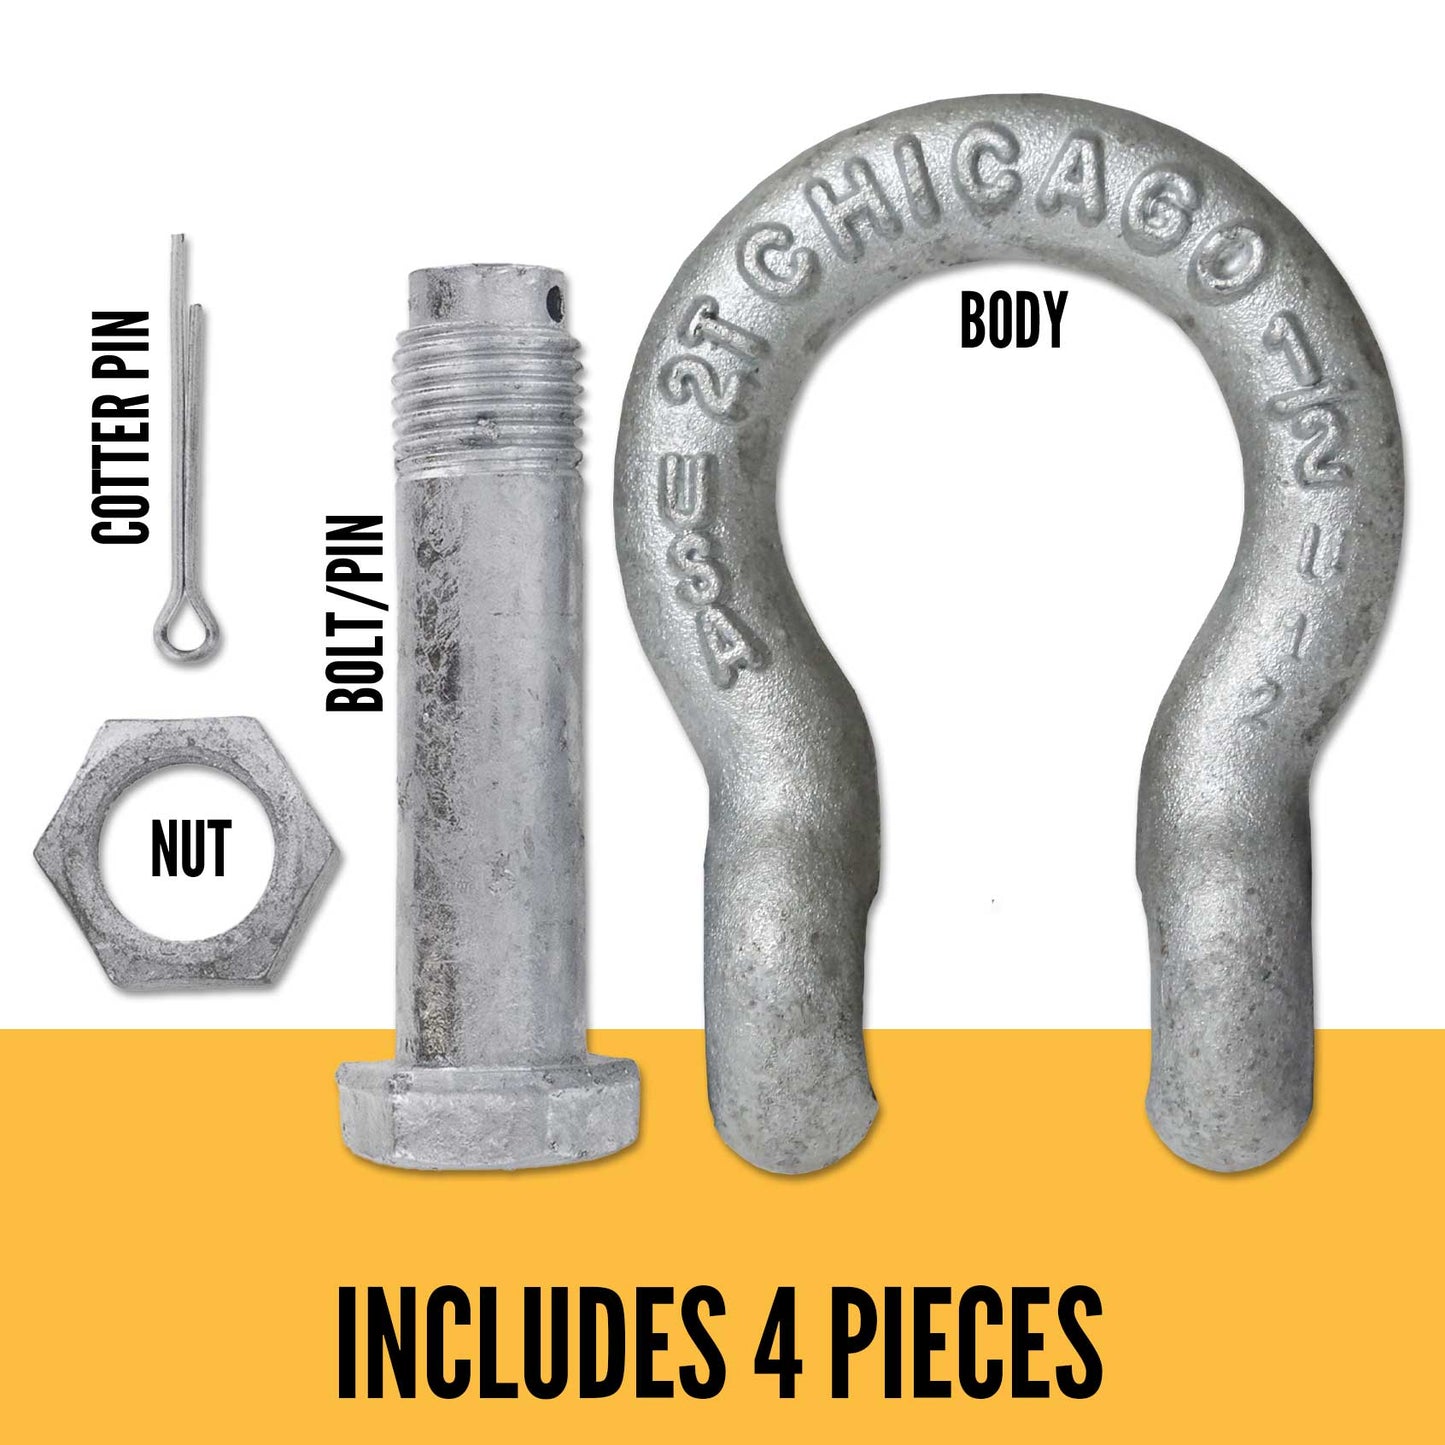 Bolt Type Anchor Shackle - Chicago Hardware - 1/2" Galvanized Steel - 2 Ton parts of a shackle